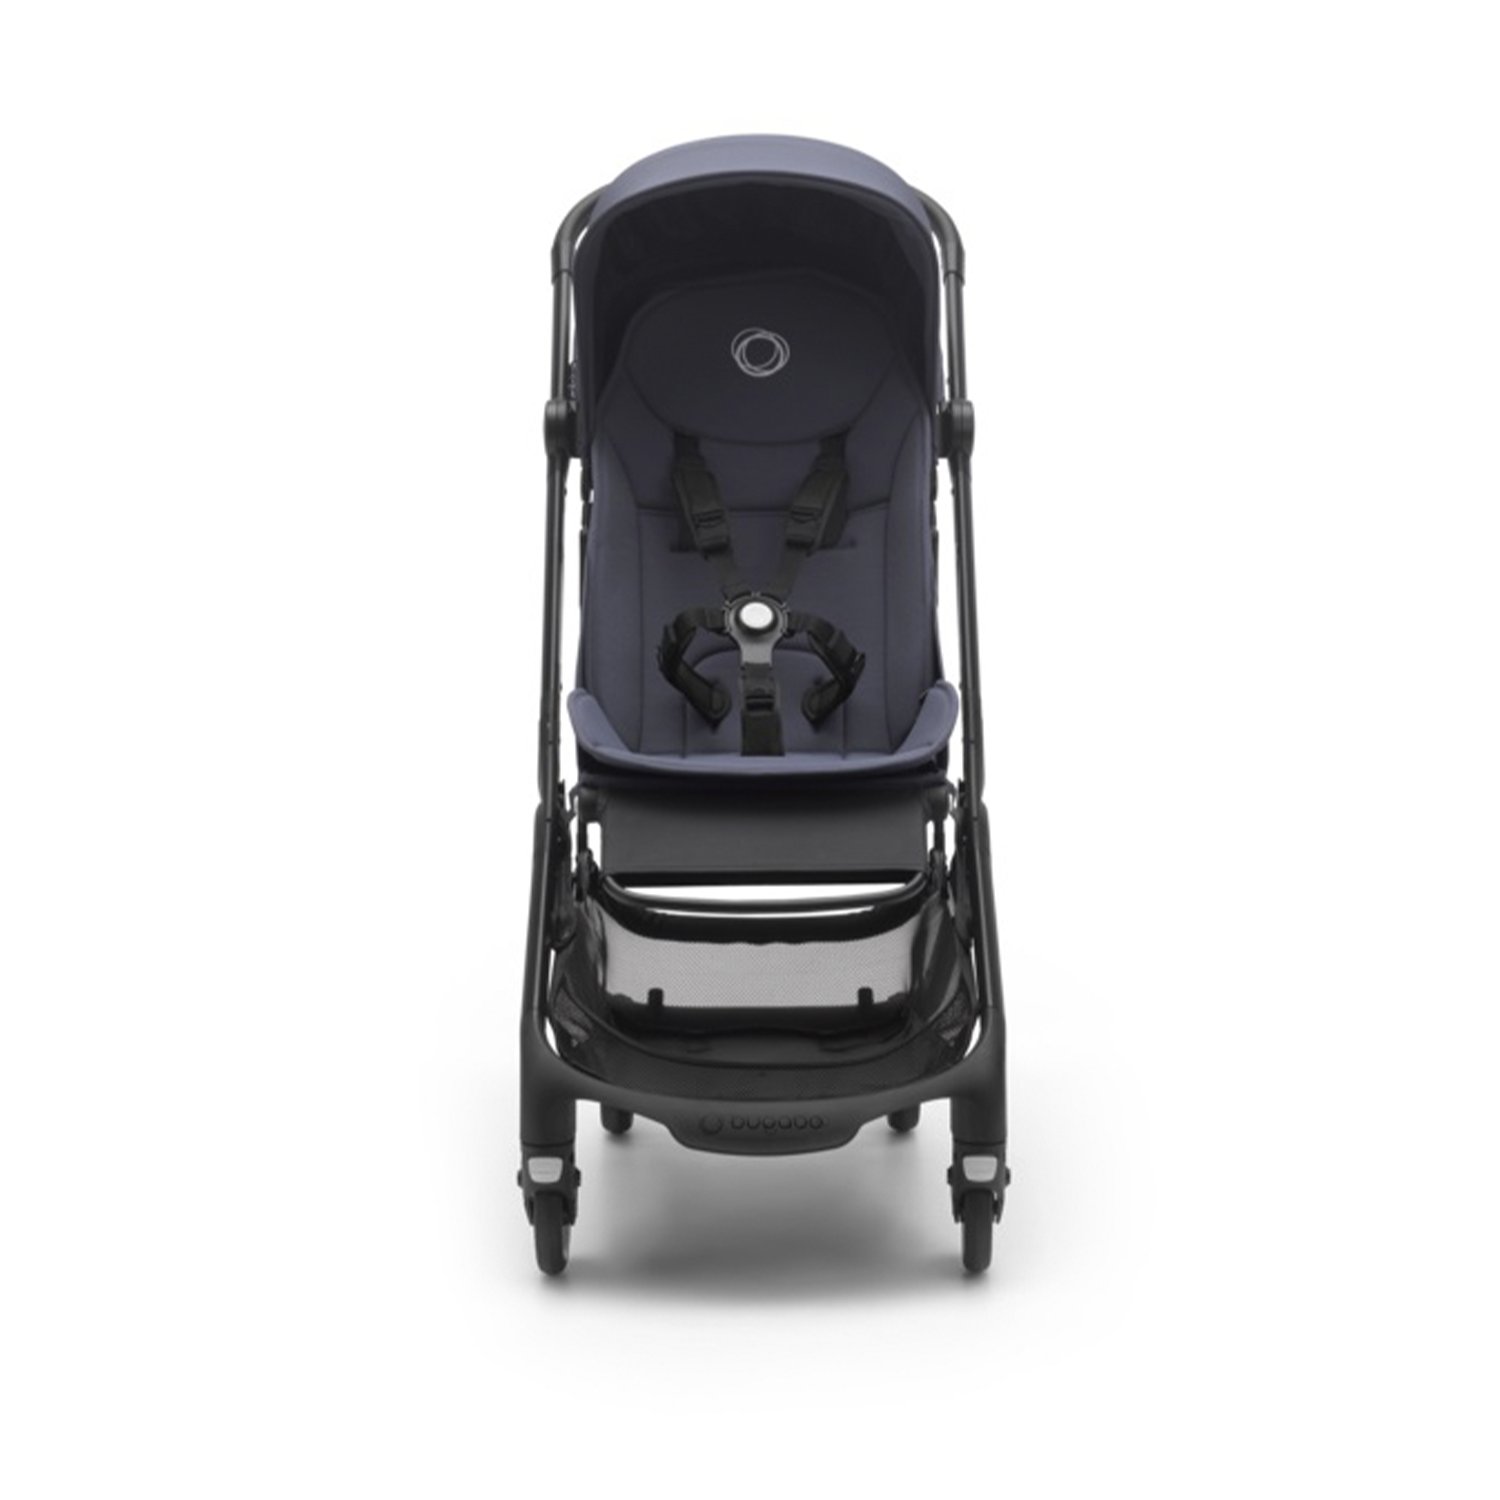 Прогулочная коляска Bugaboo Butterfly complete Black/Stormy blue - Stormy blue прогулочная коляска bugaboo bee 6 complete